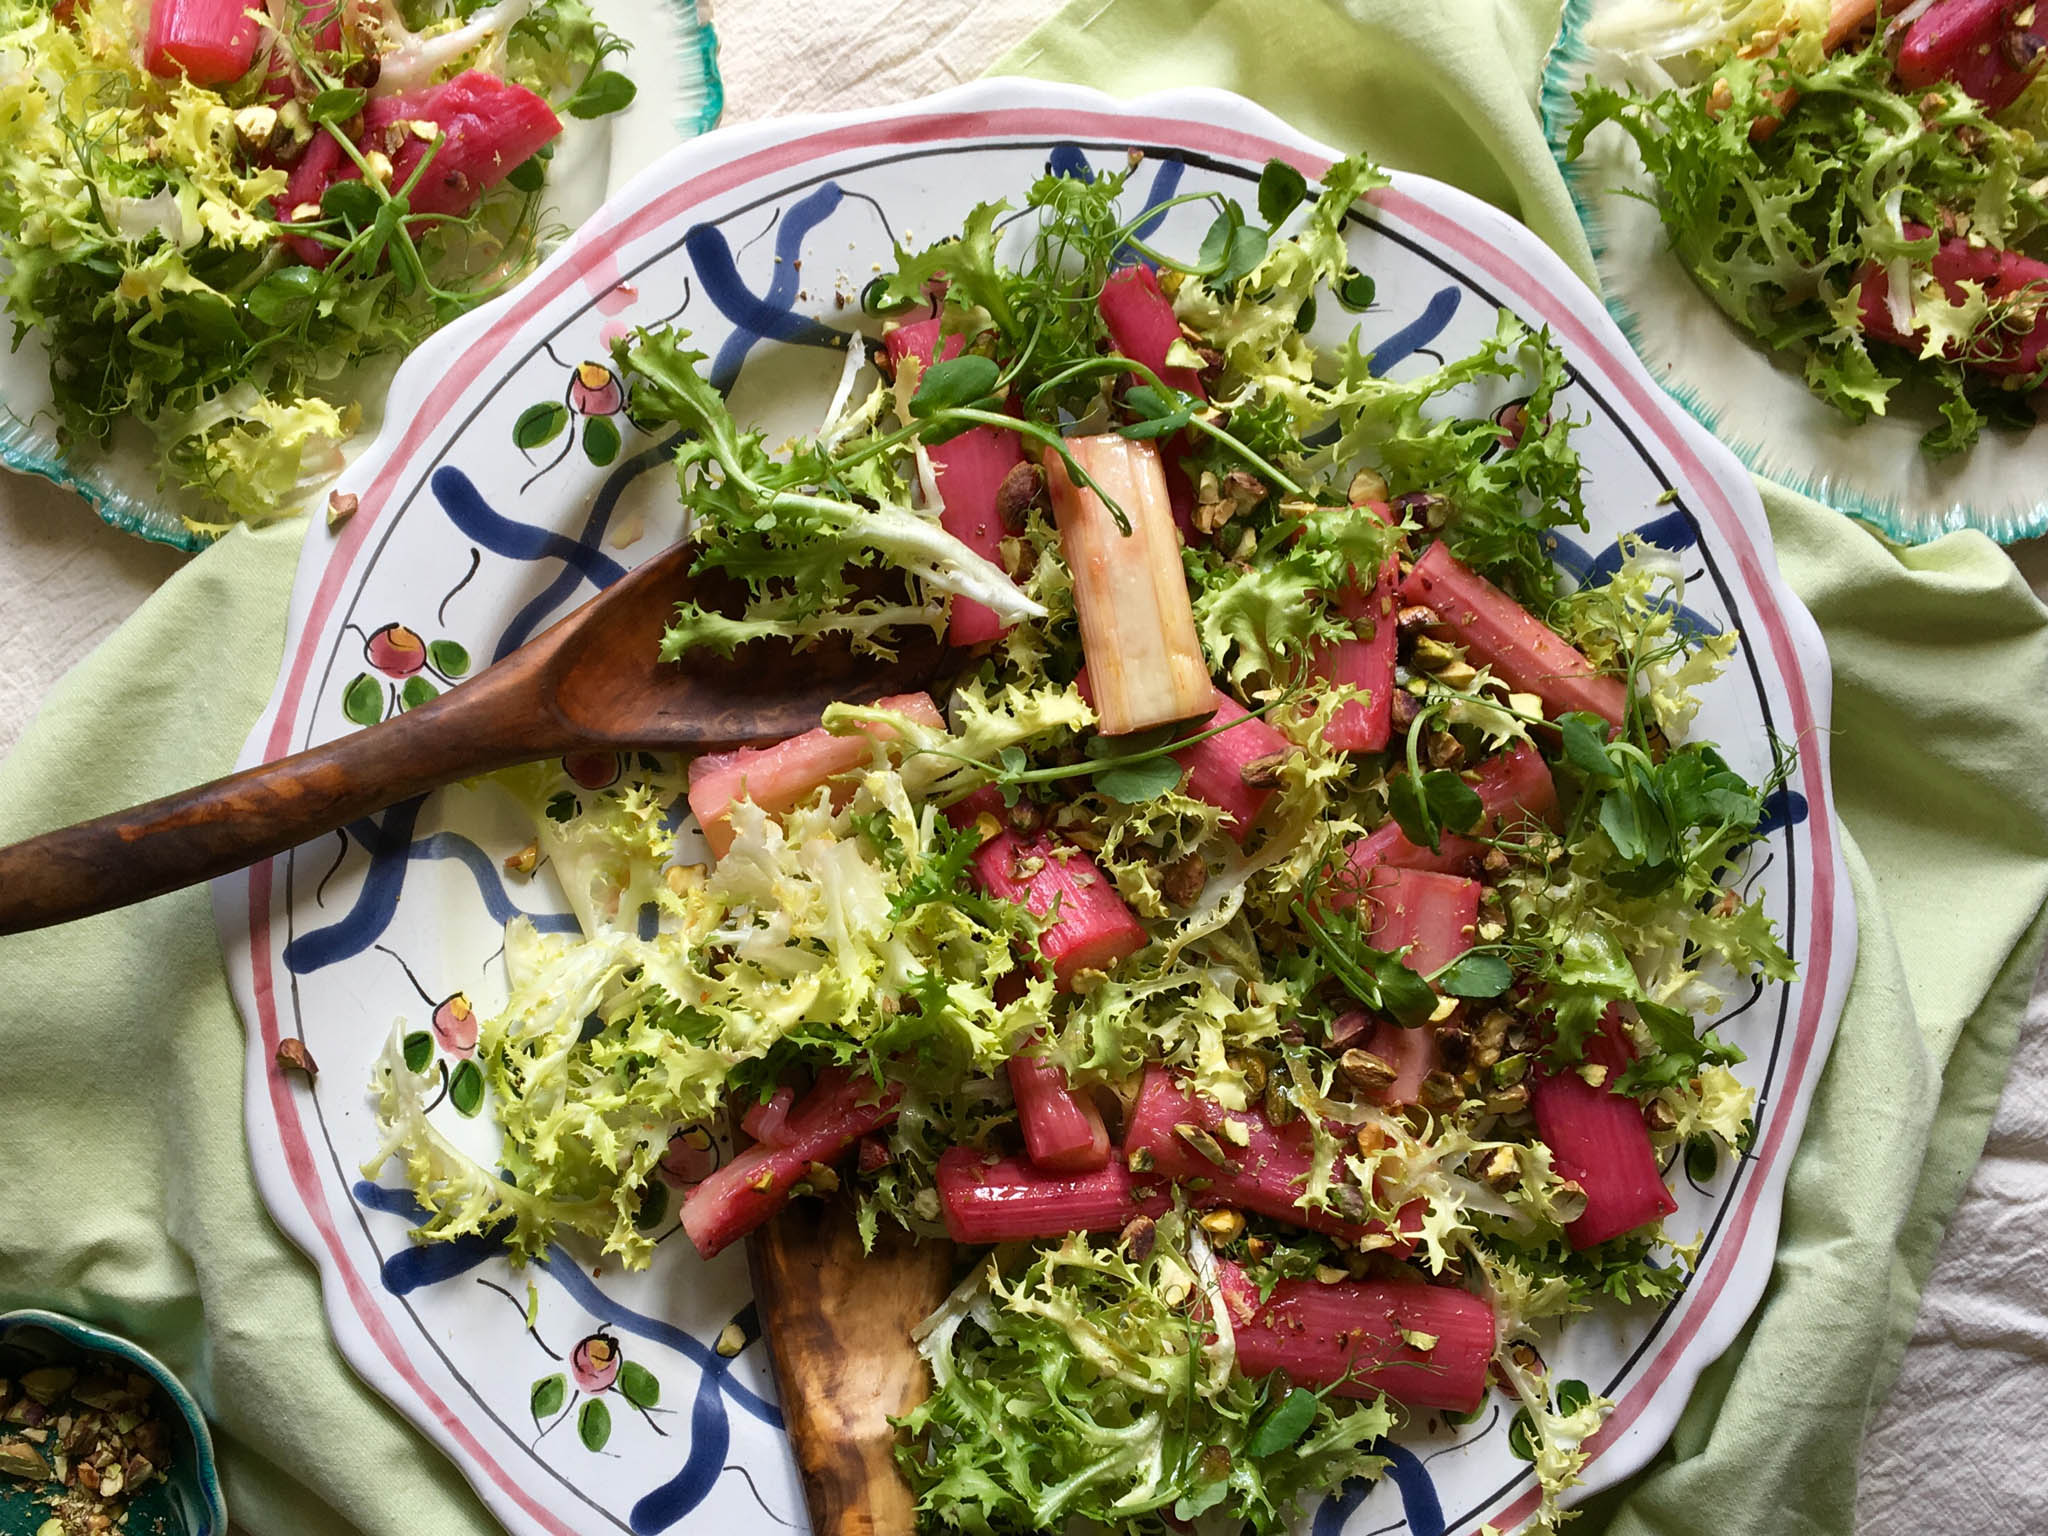 You can always add goats cheese or prosciutto to this vegan salad for a different take